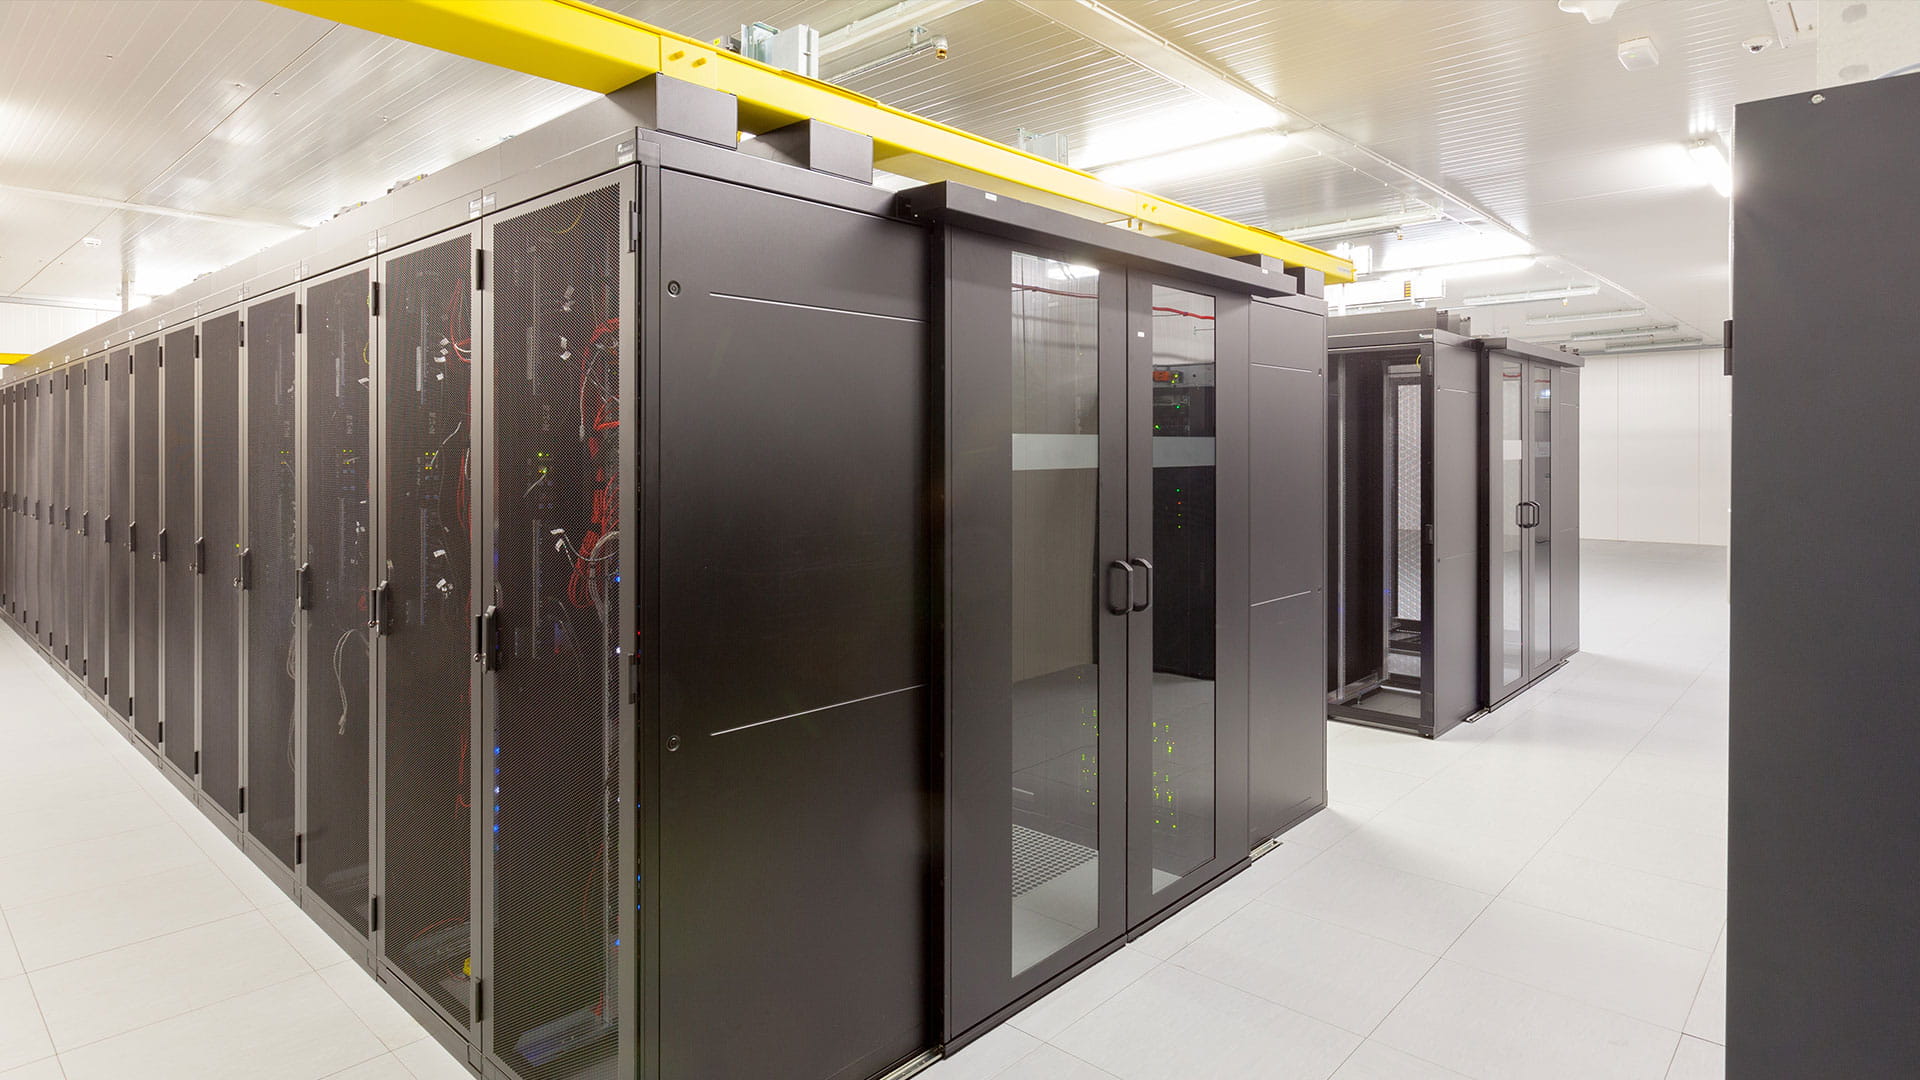 A tier data centre with rows of server racks